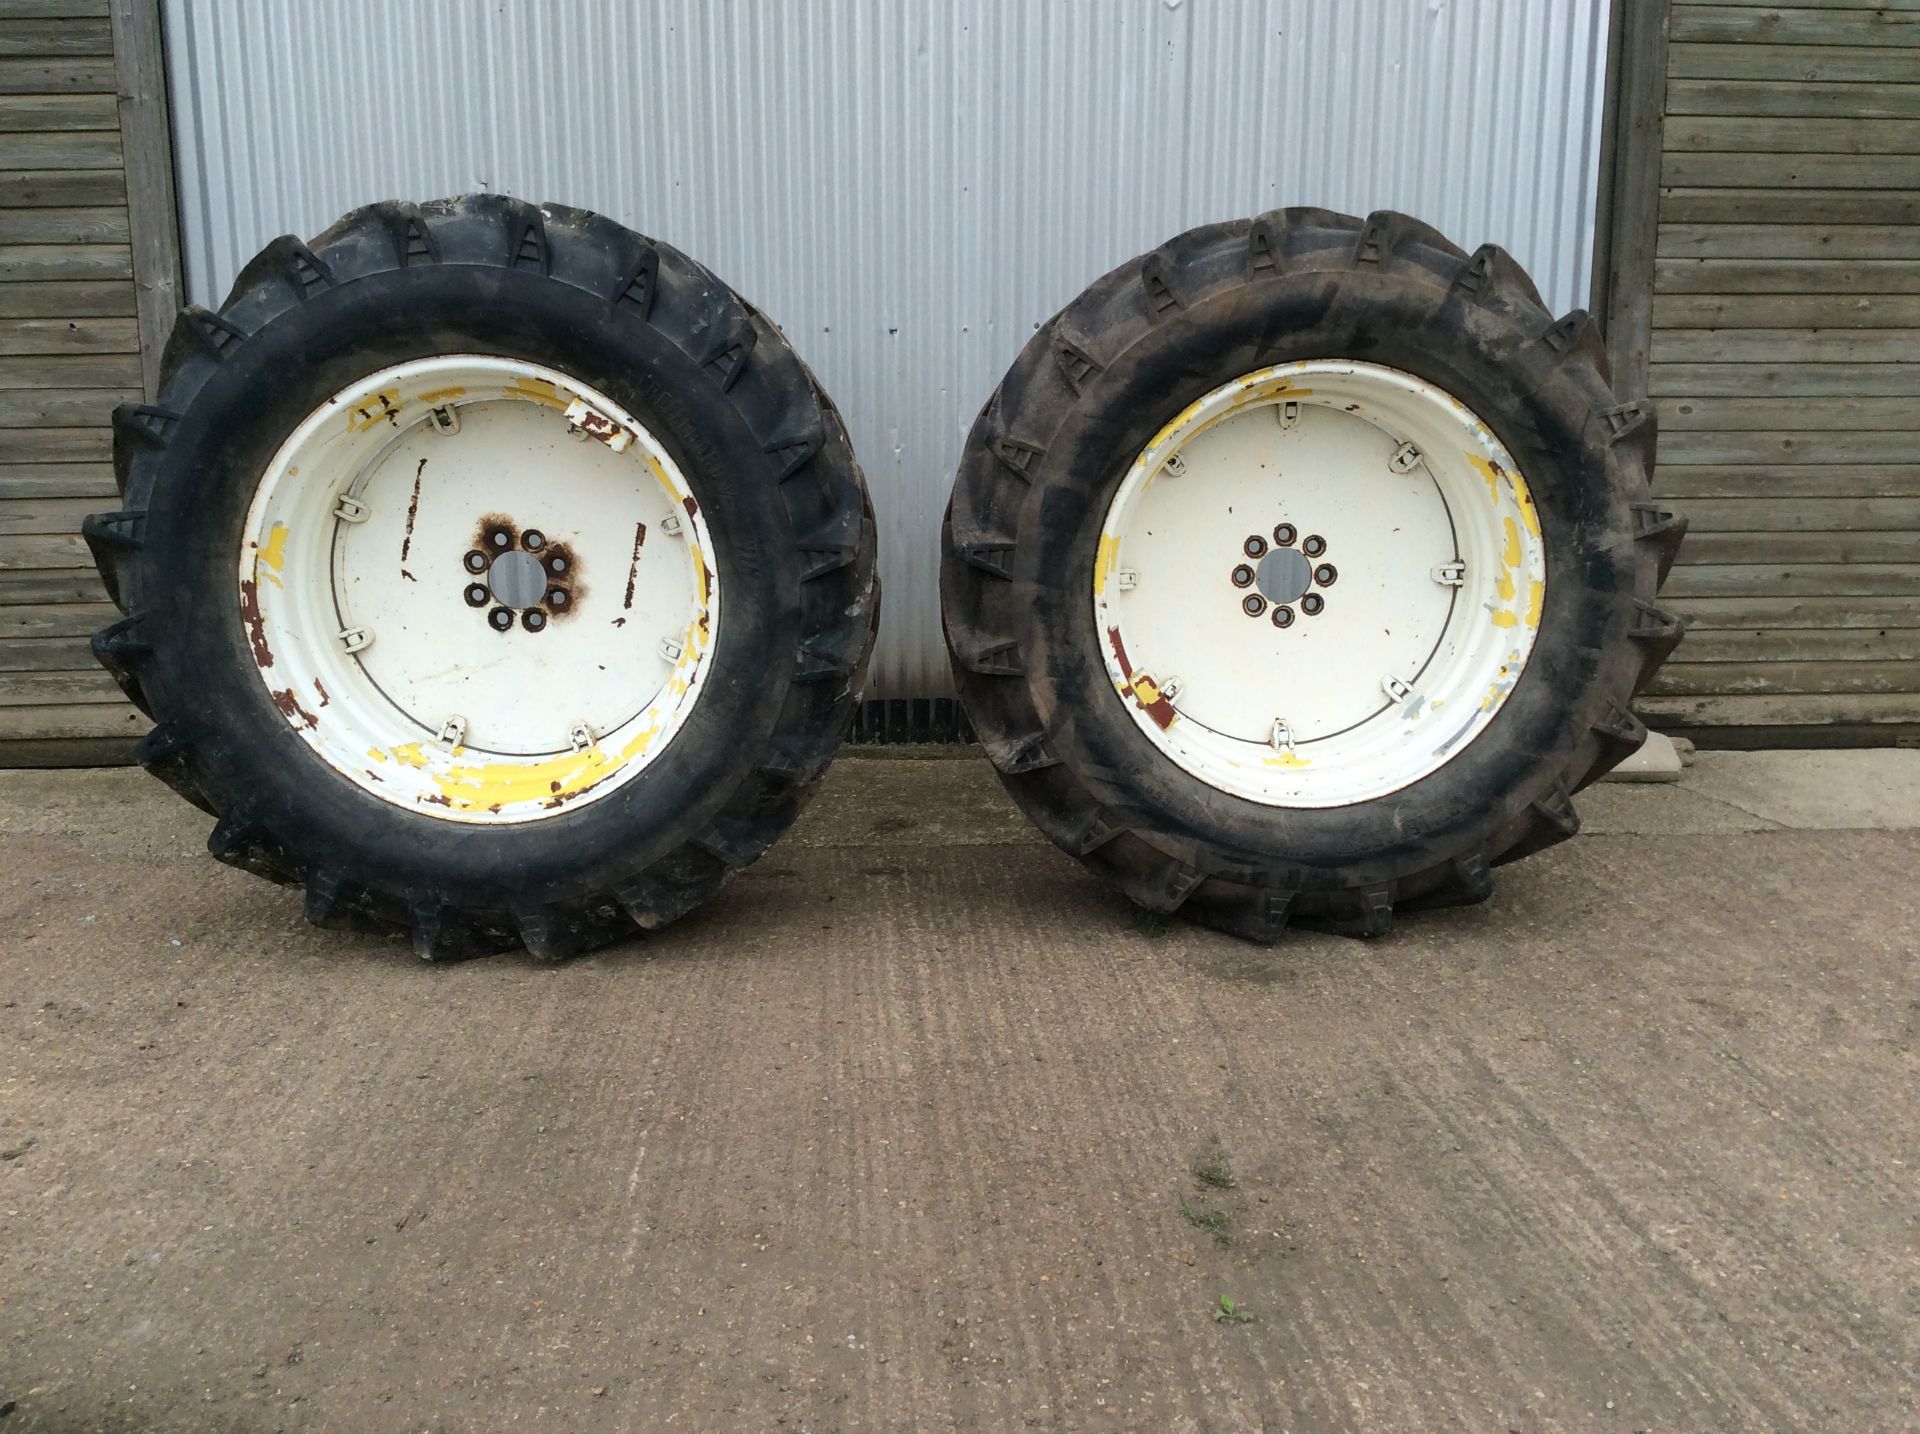 Trelleborg LP650-38 centres to fit Ford Part Worn Location: Huntingdon, Cambridgeshire - Image 2 of 3